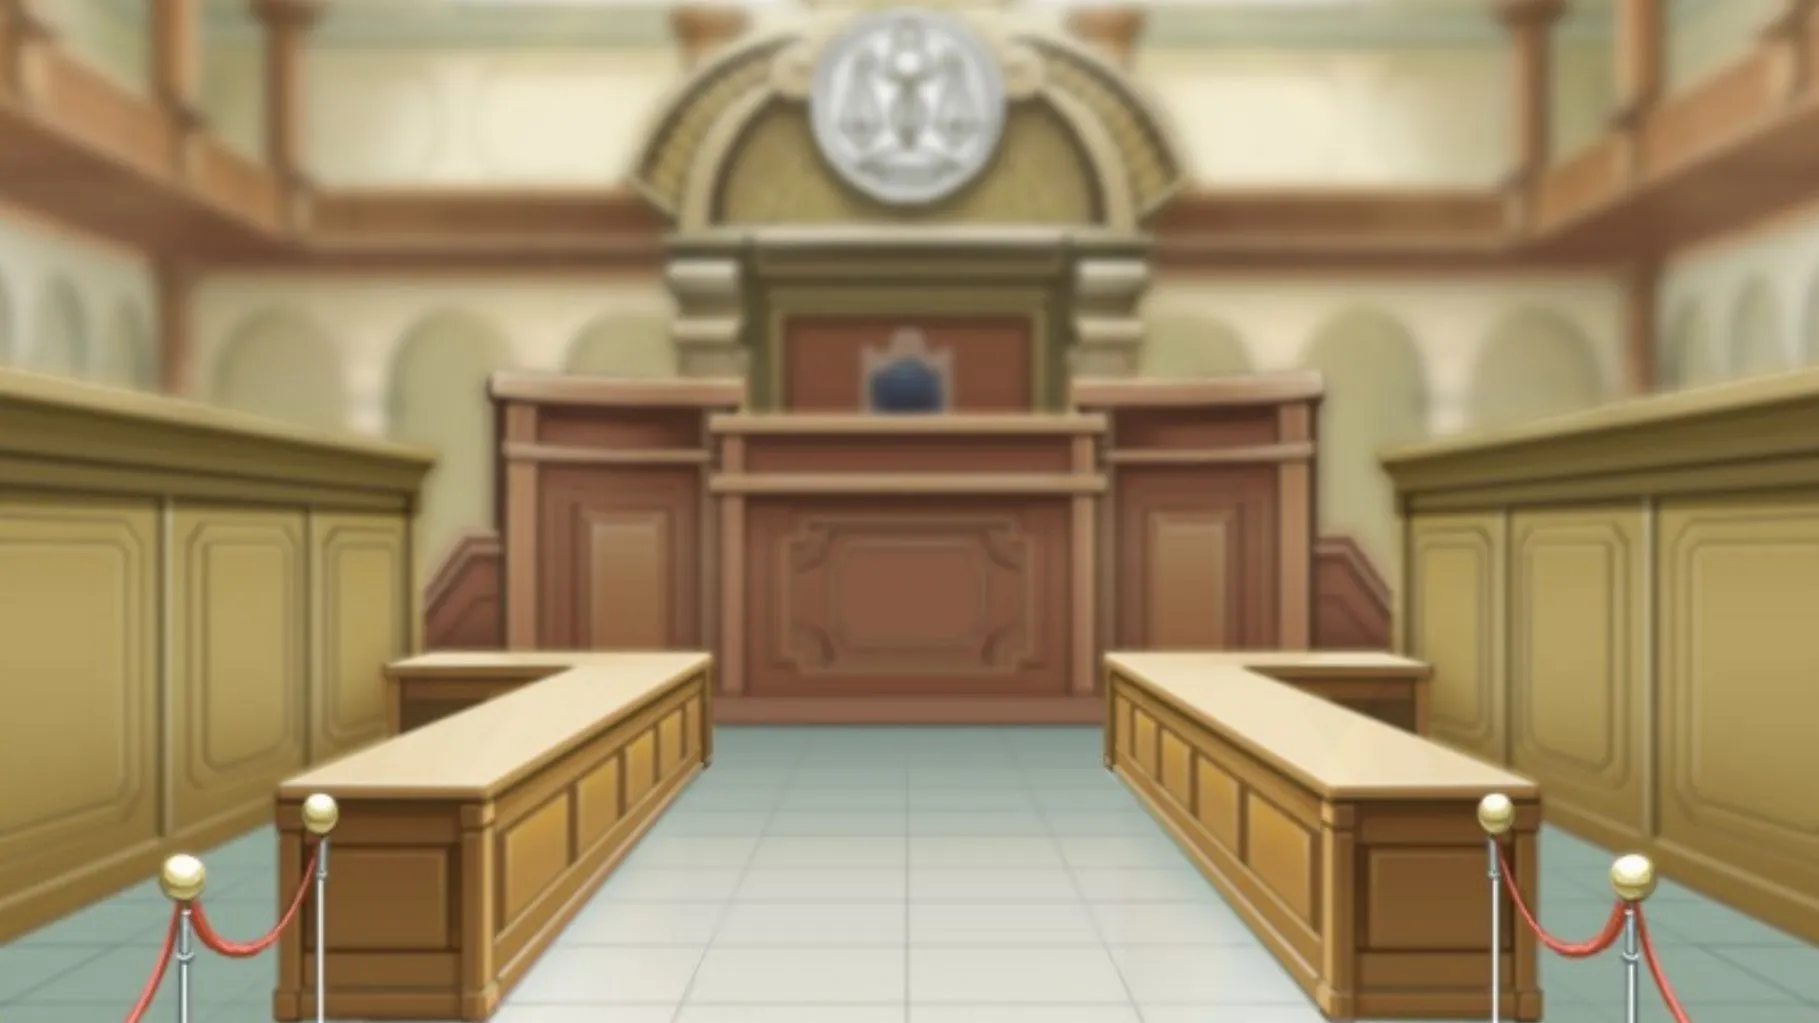 Apollo Justice: Ace Attorney Dated For iOS, Mobile - Hey Poor Player